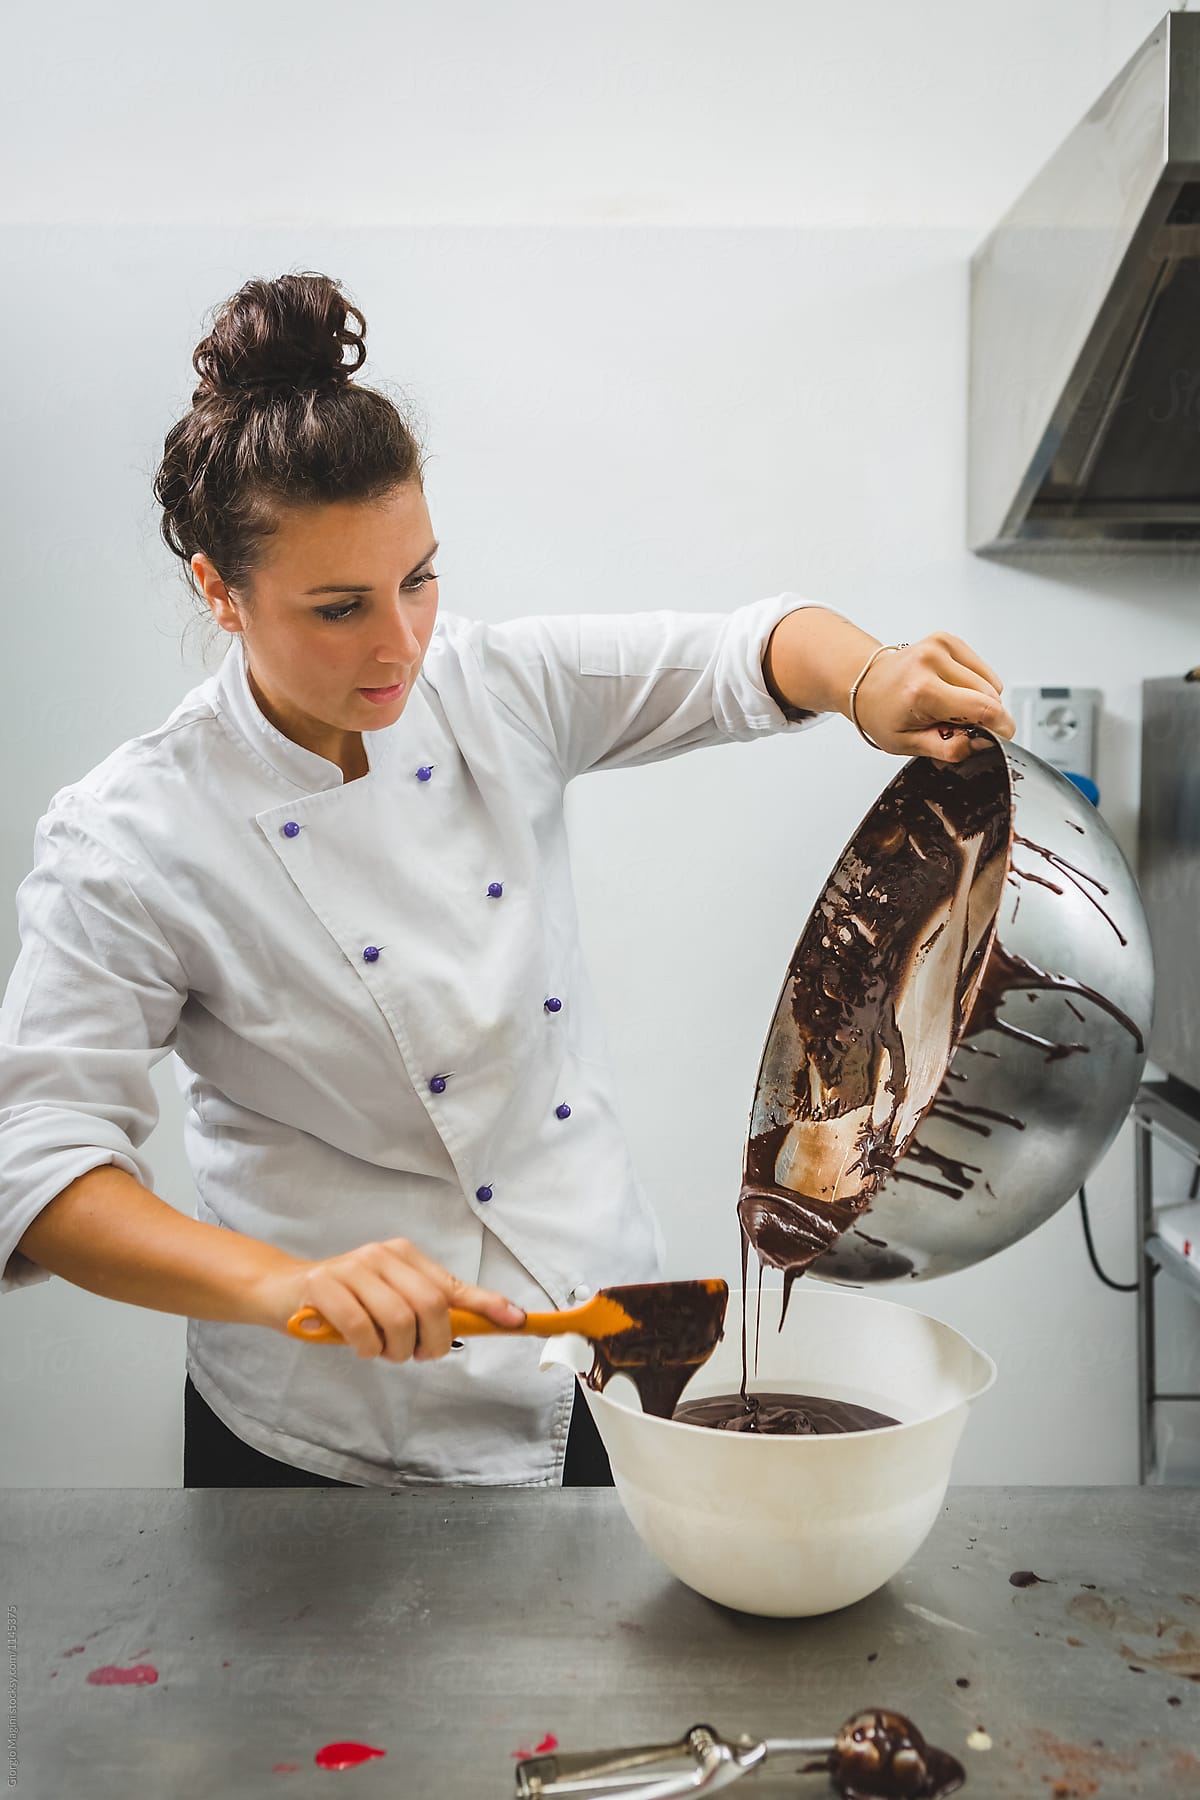 Pastry Chef Pouring Chocolate Batter in a Bowl